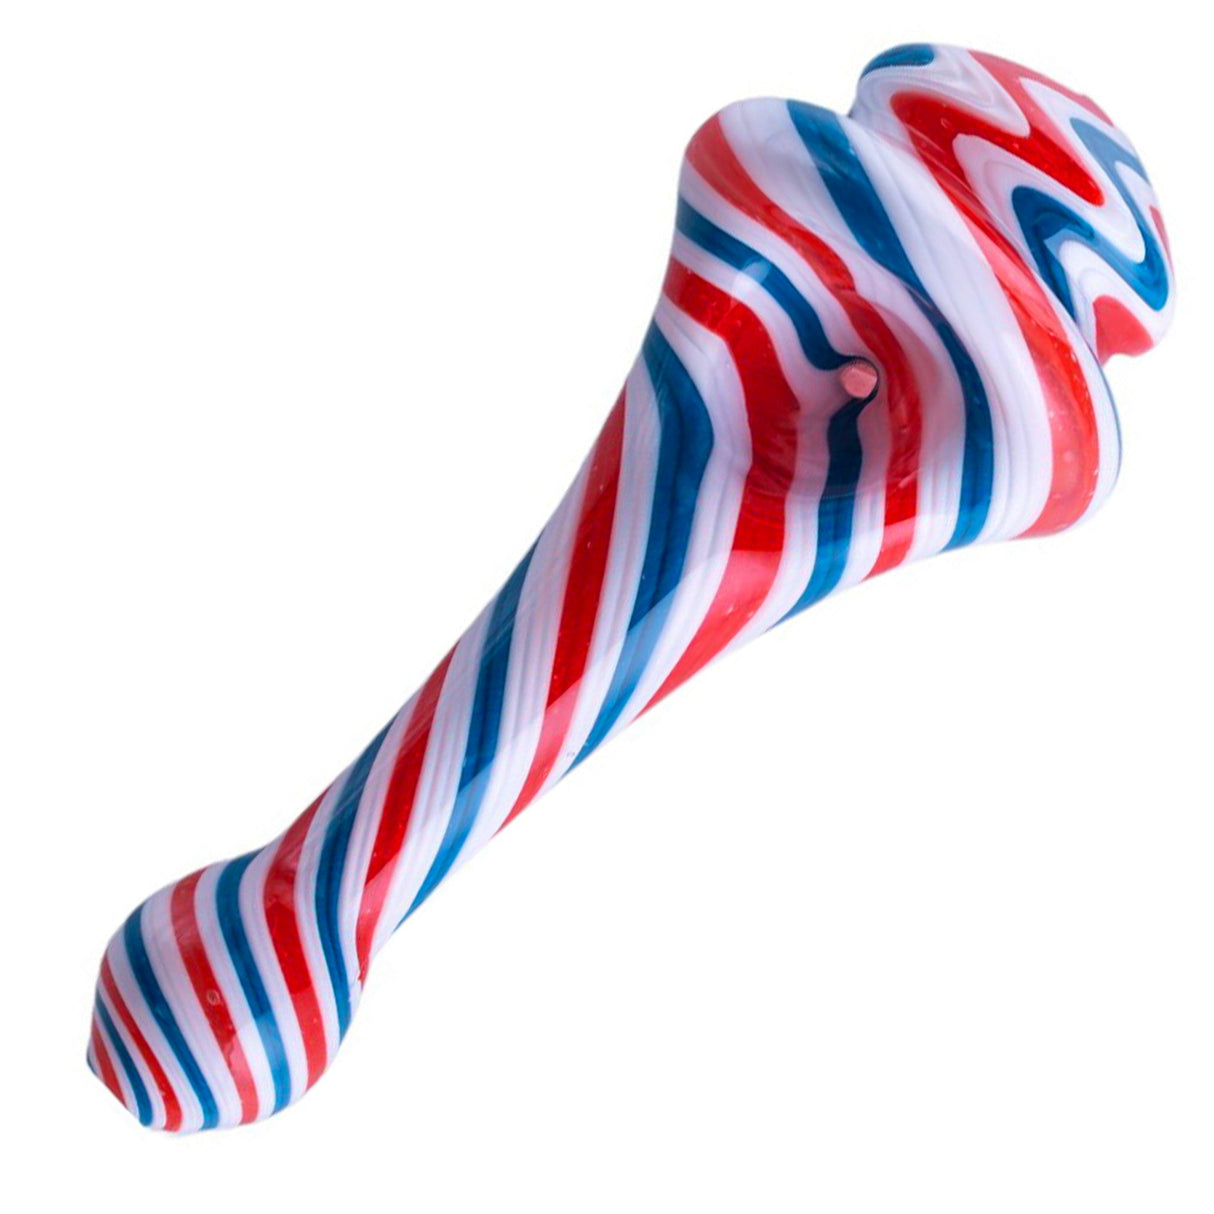 Crush Spinning Top Hand Pipe in Patriotic Red, White, and Blue Stripes - Angled View